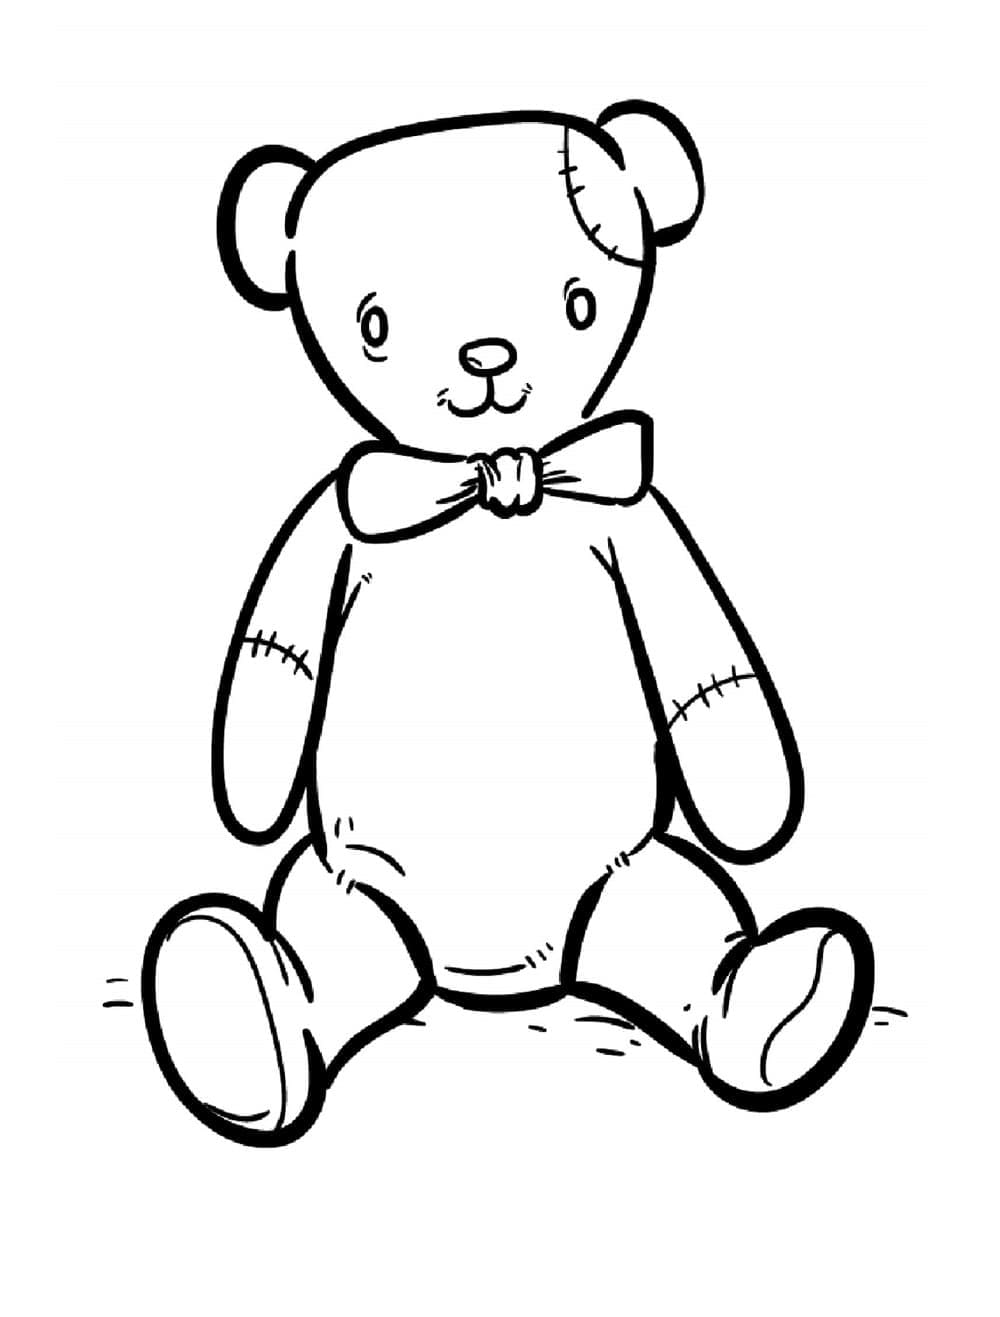 Printable Teddy Bear Free Pictures Coloring Page